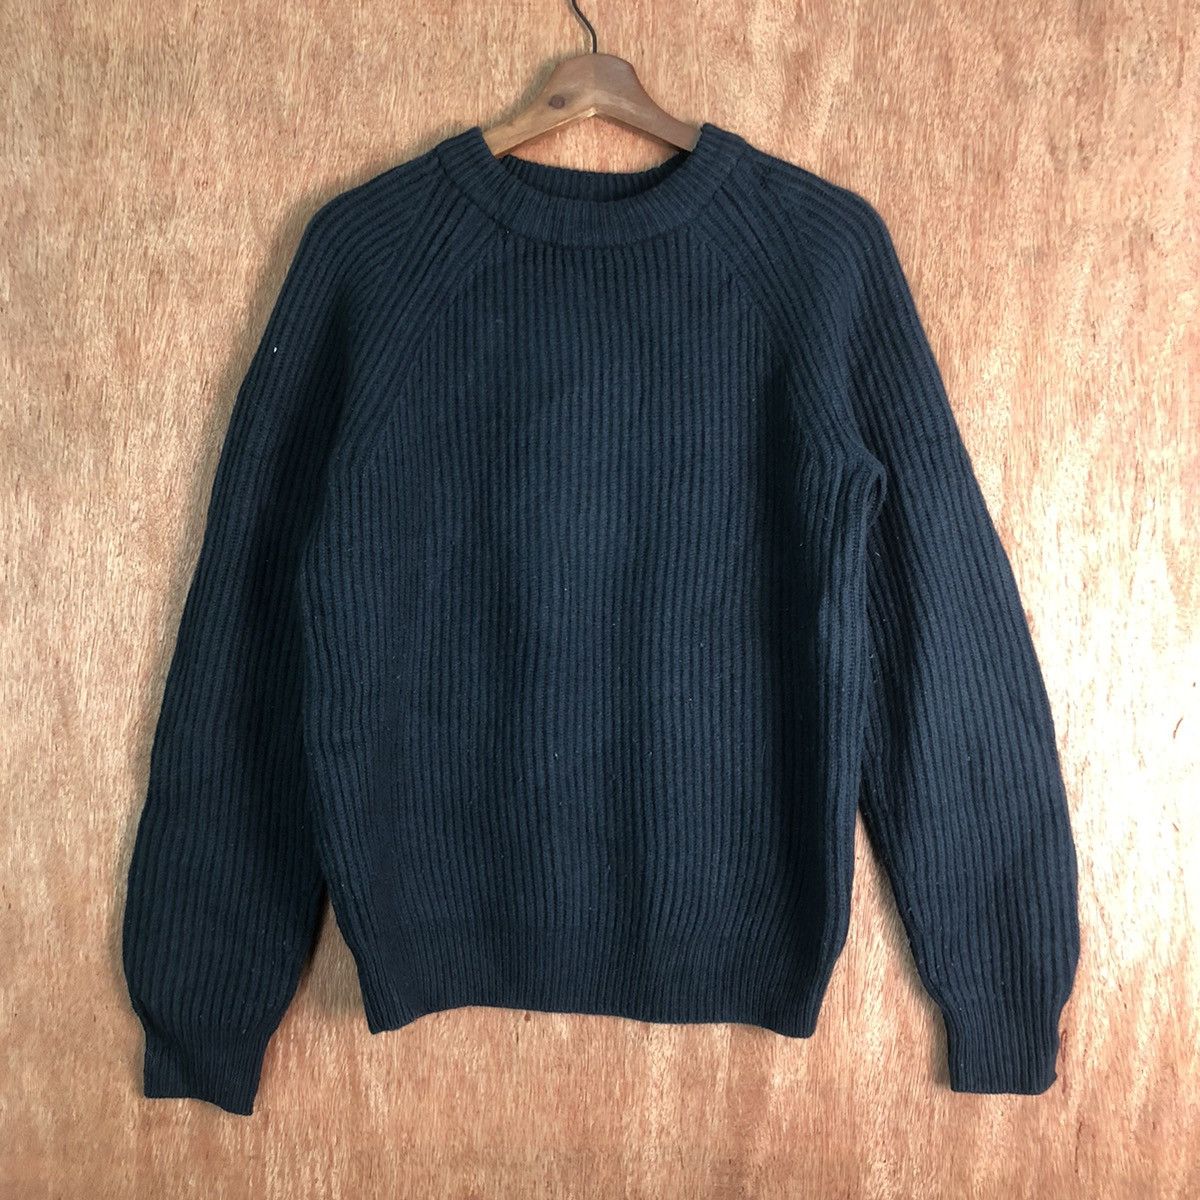 Undercover Men's Pullover Sweaters | Grailed